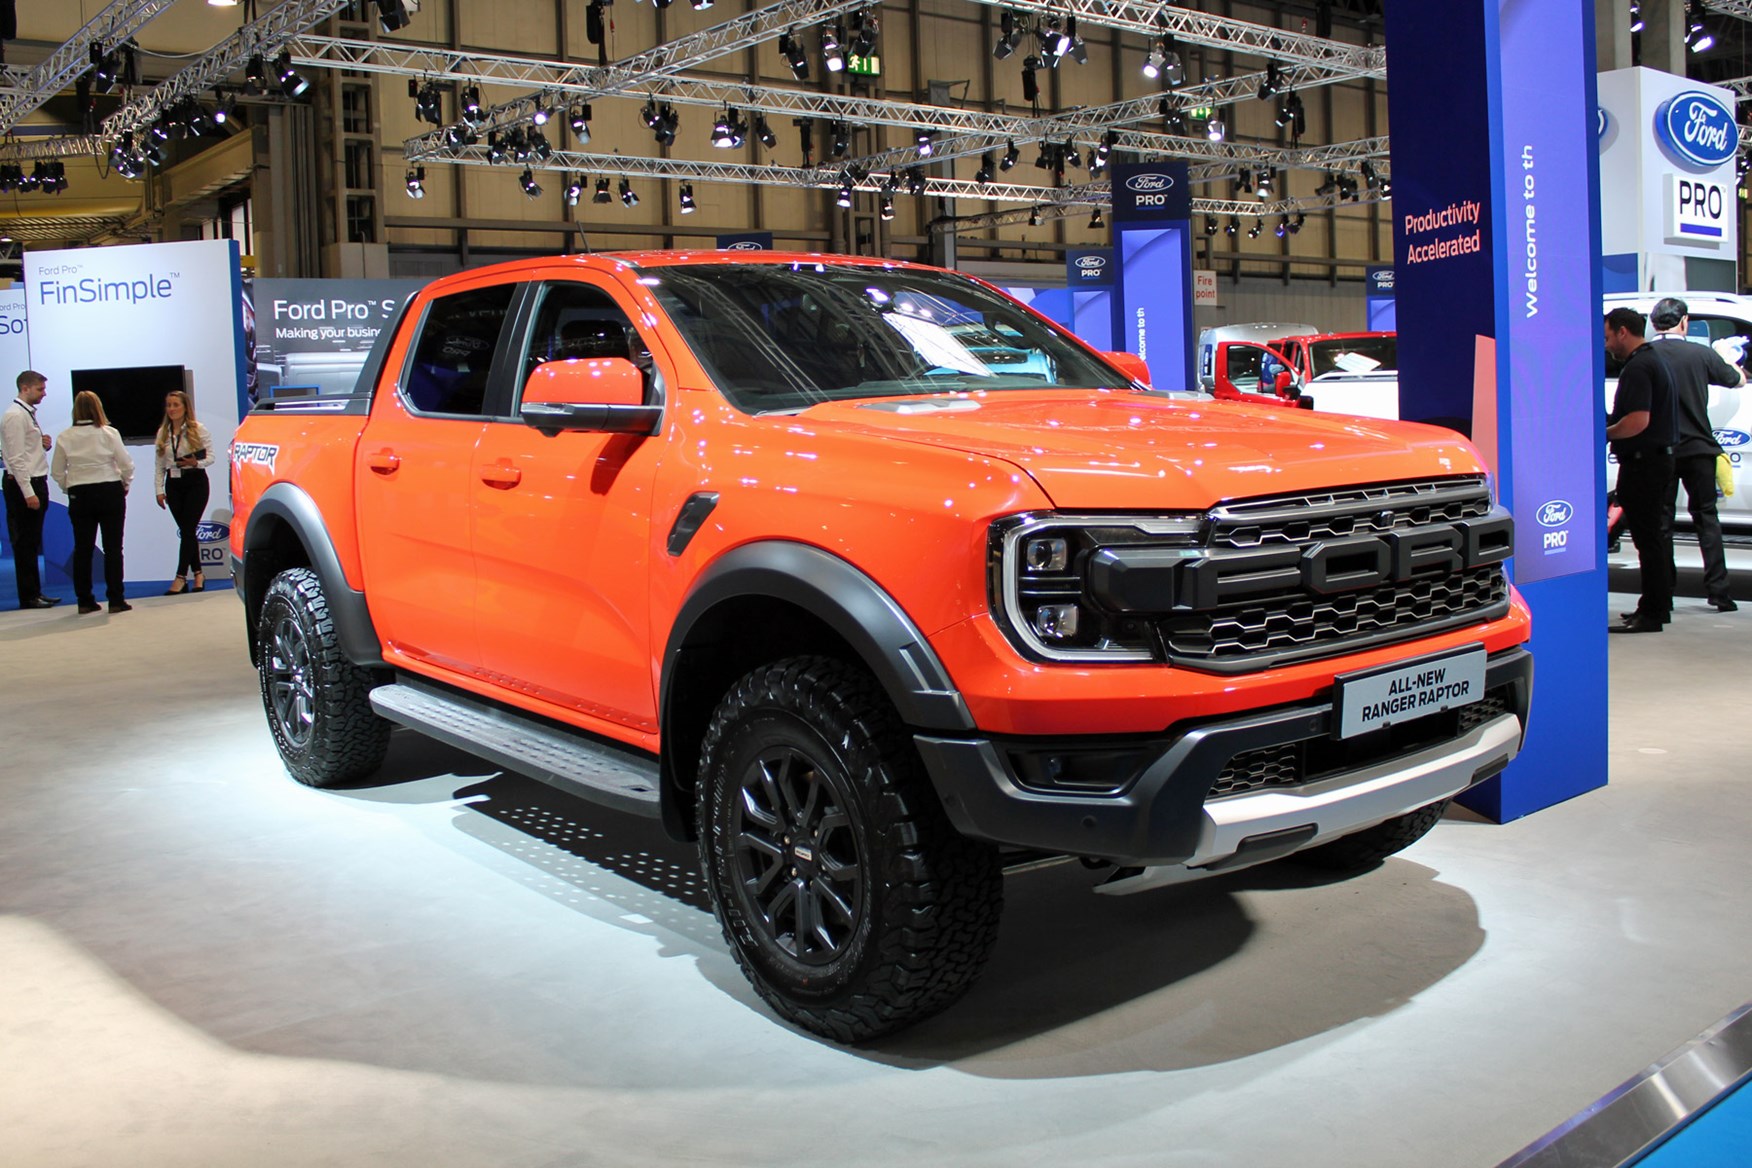 Ford Ranger Raptor - details on engines, launch dates and pricing | Parkers